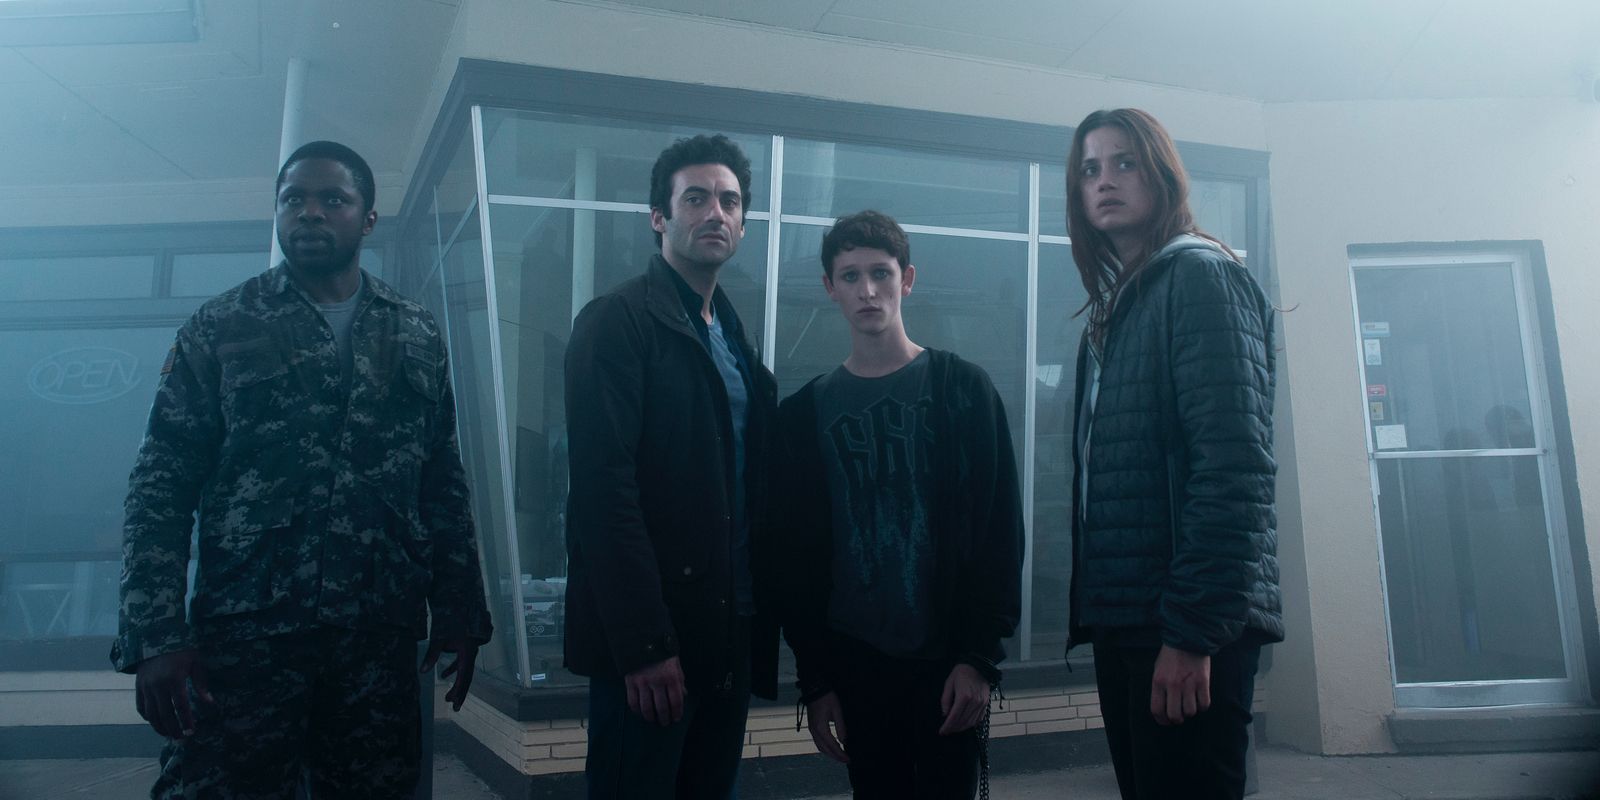 Okezie Morro, Morgan Spector, Russell Posner, and Danica Curcic stand together in The Mist